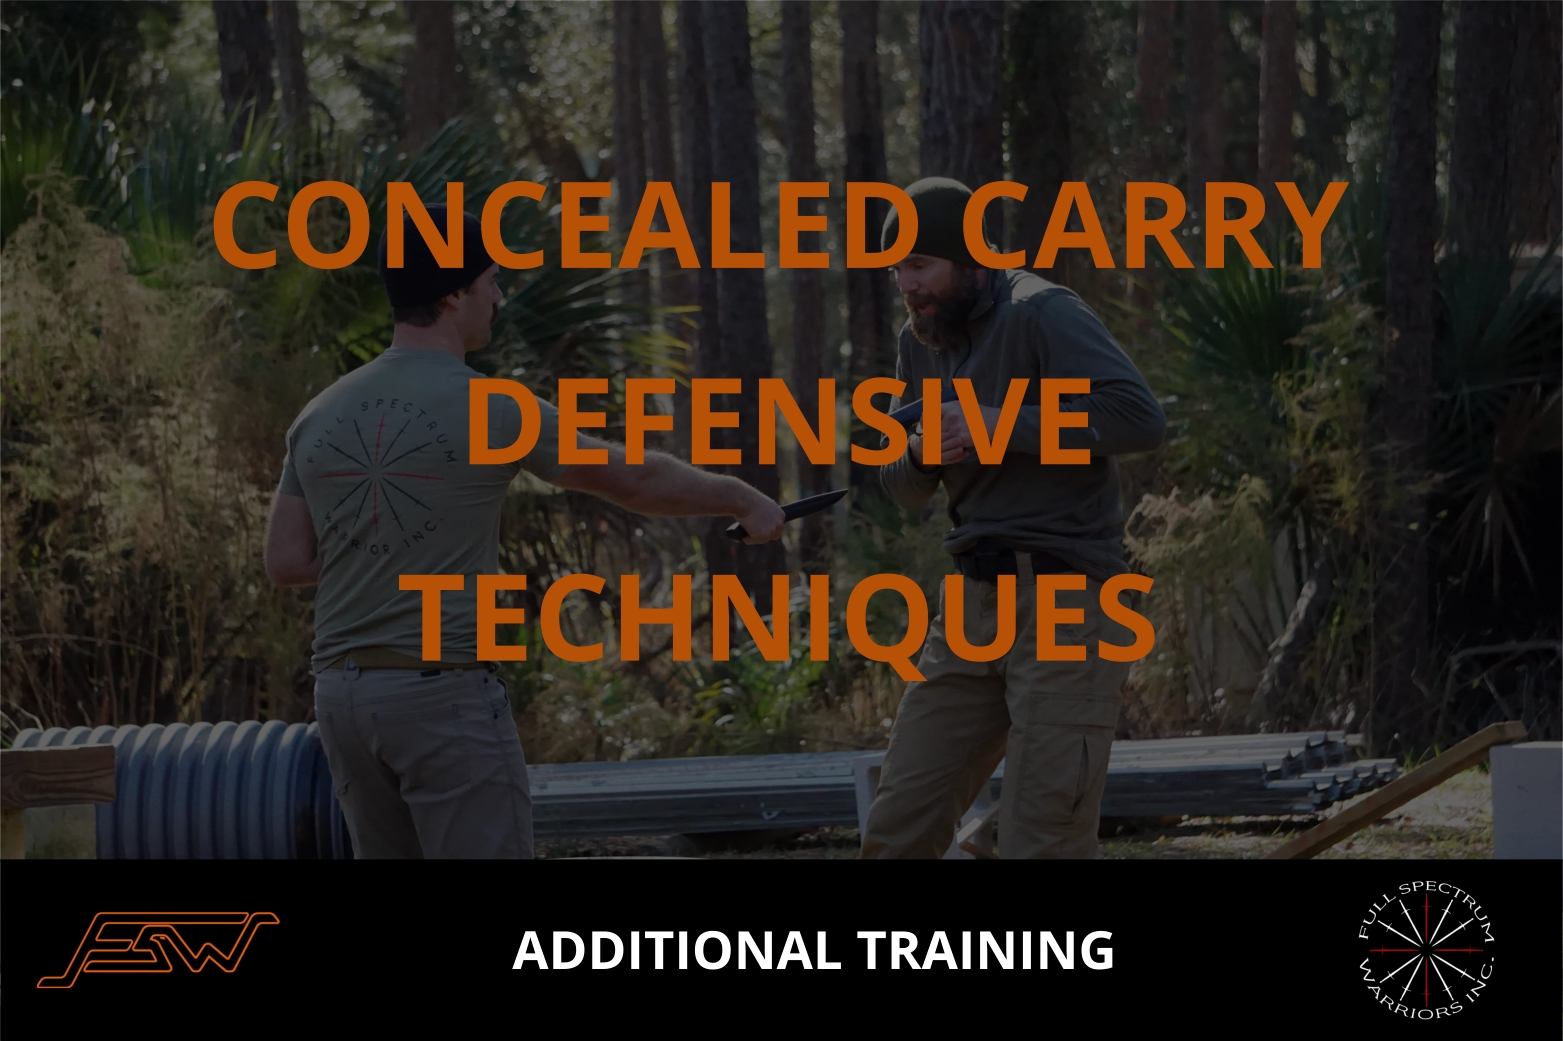 CONCEALED CARRY DEFENSIVE TECHNIQUES